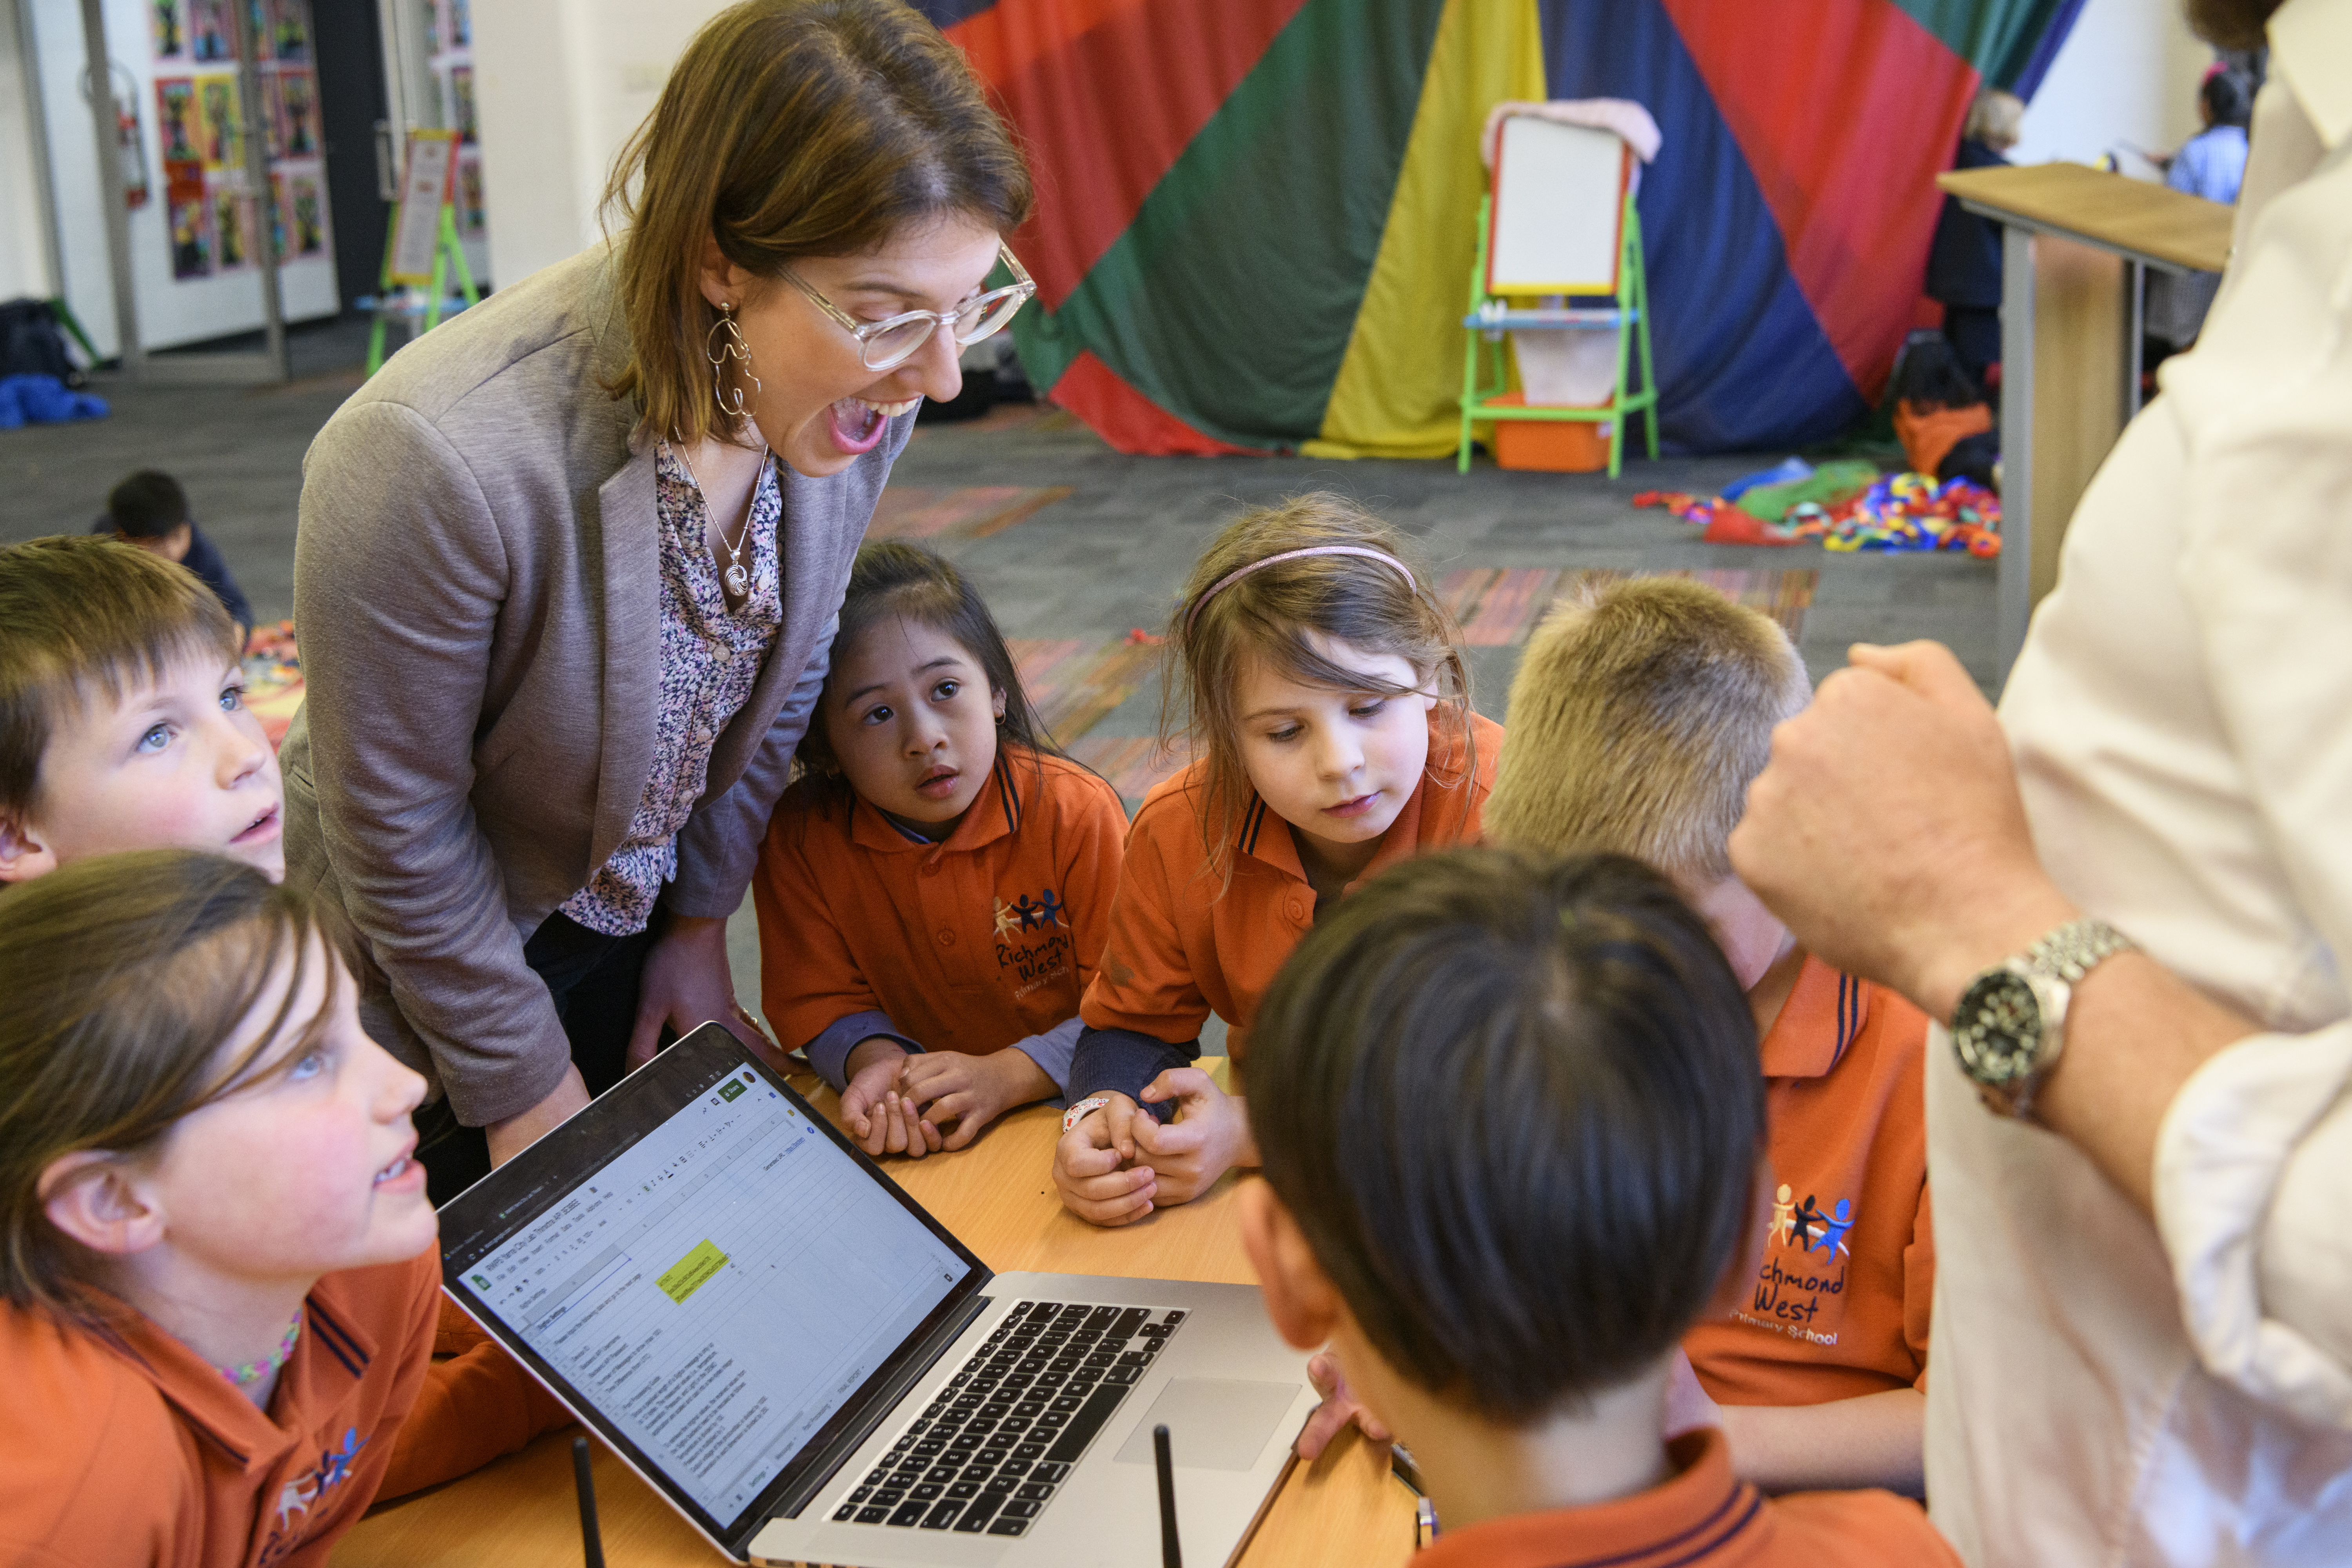 Some children in a school uniform and a young woman gather around a laptop.